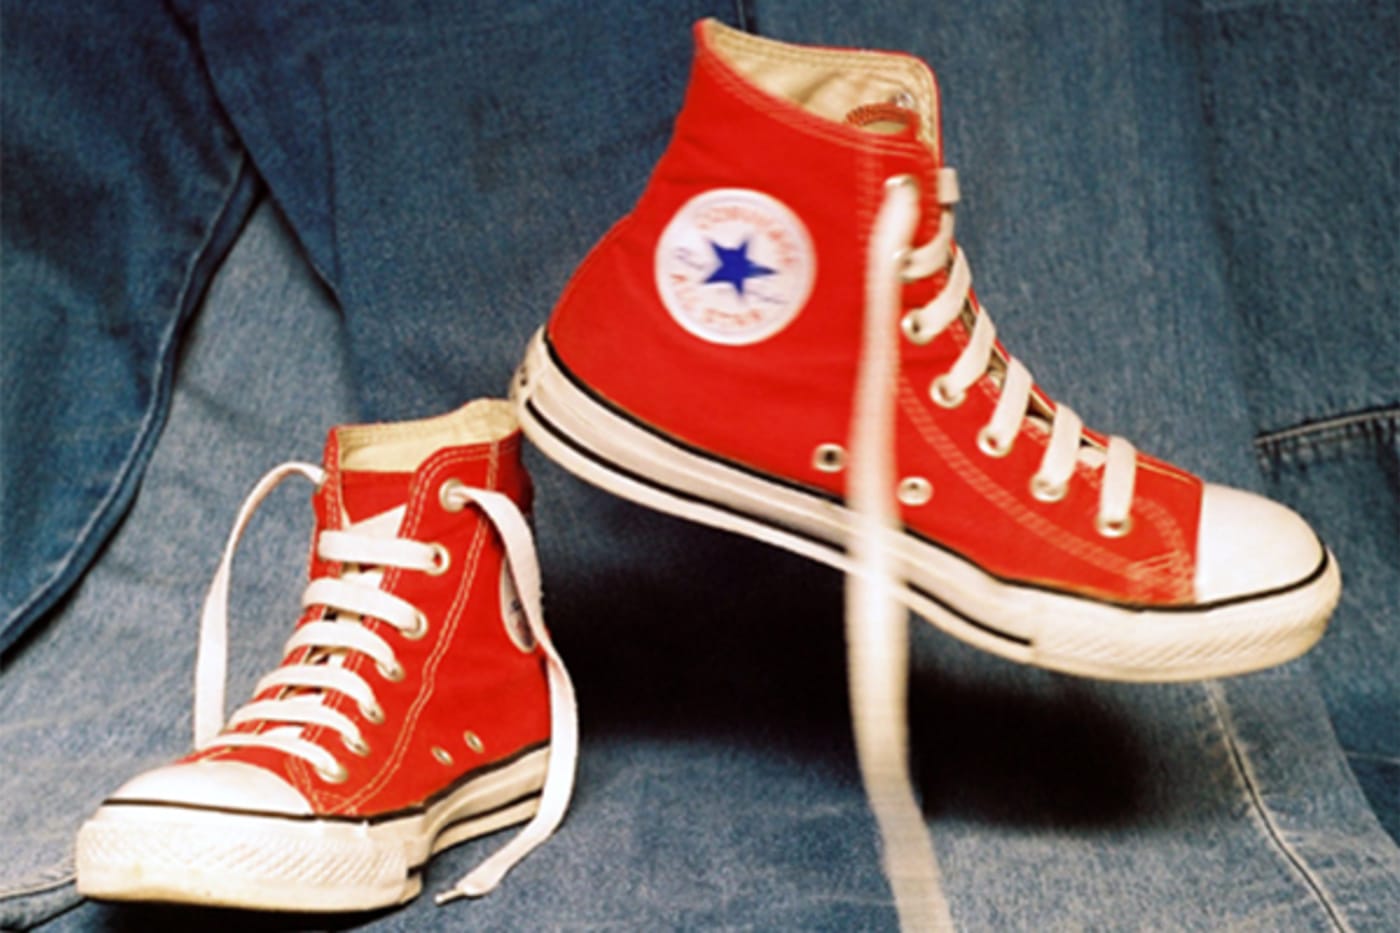 50 things converse all star college professional basketball